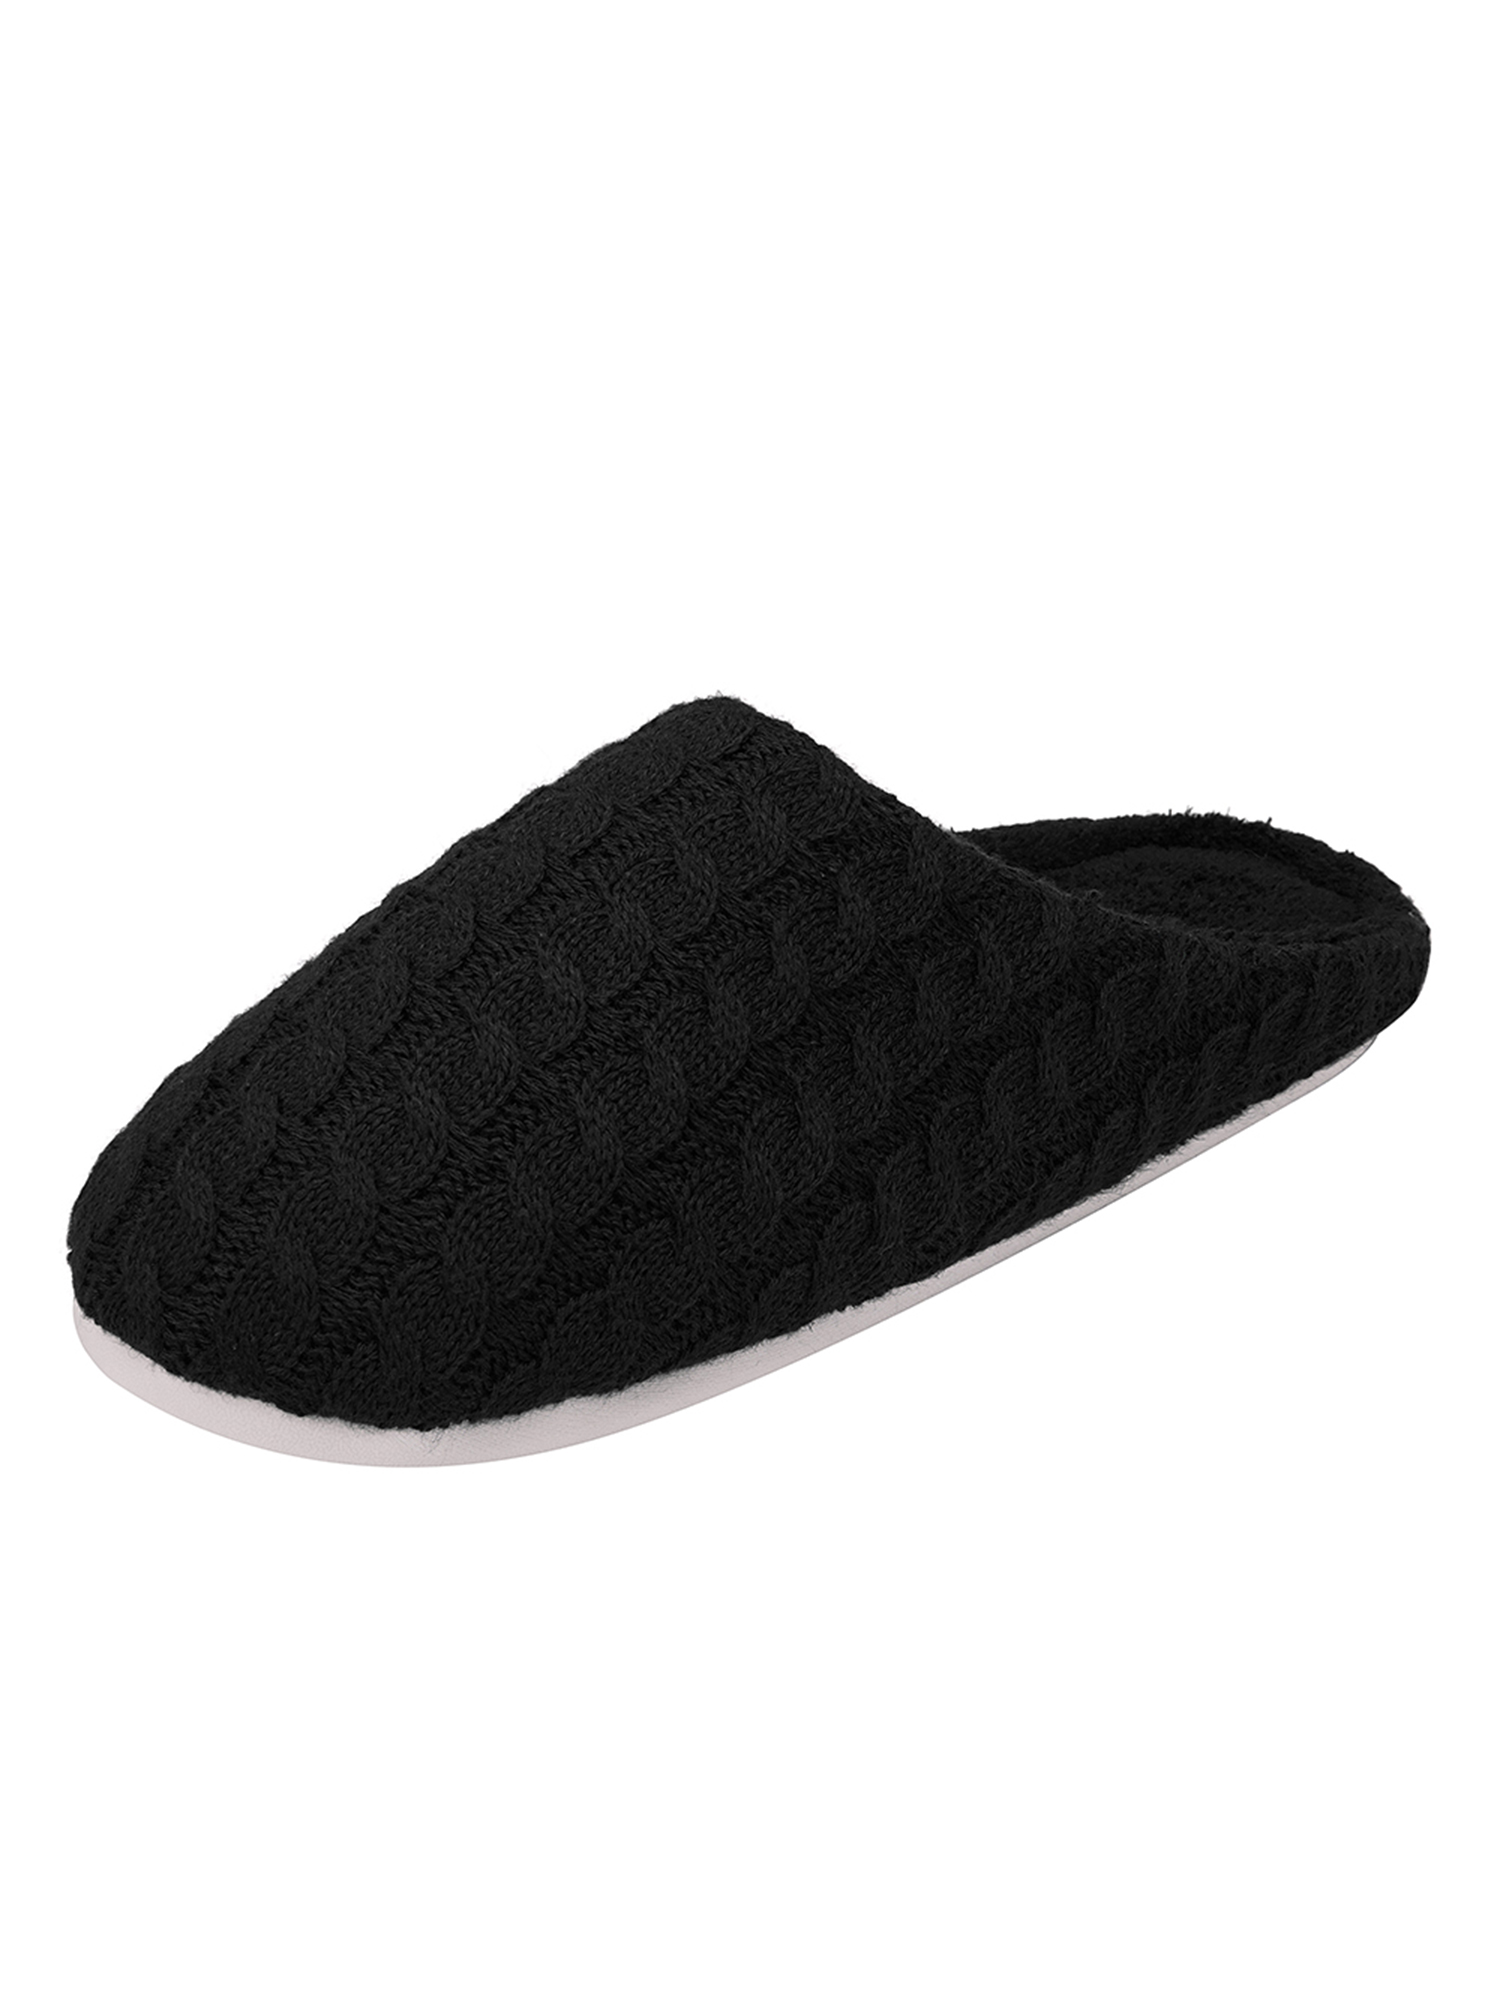 SAYFUT Men's and Women's Memory Foam House Slippers Soft Sole Cotton Comfortable Indoor Slid Slippers Slip Ons Mens Slide Slippers Shoes - image 5 of 8